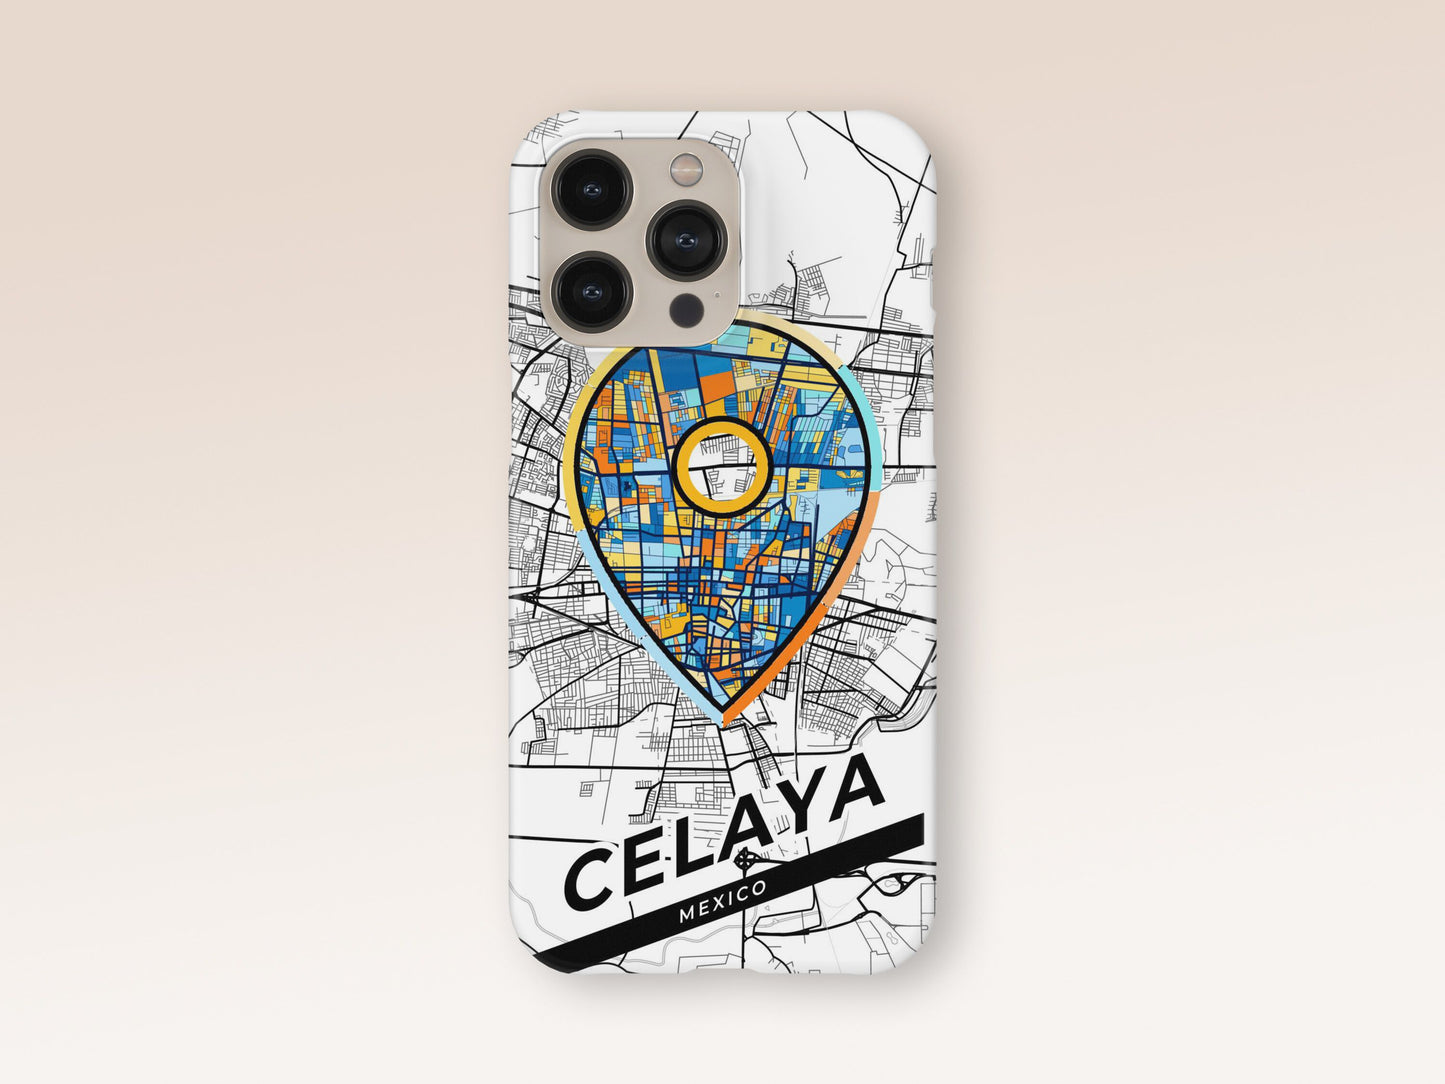 Celaya Mexico slim phone case with colorful icon. Birthday, wedding or housewarming gift. Couple match cases. 1